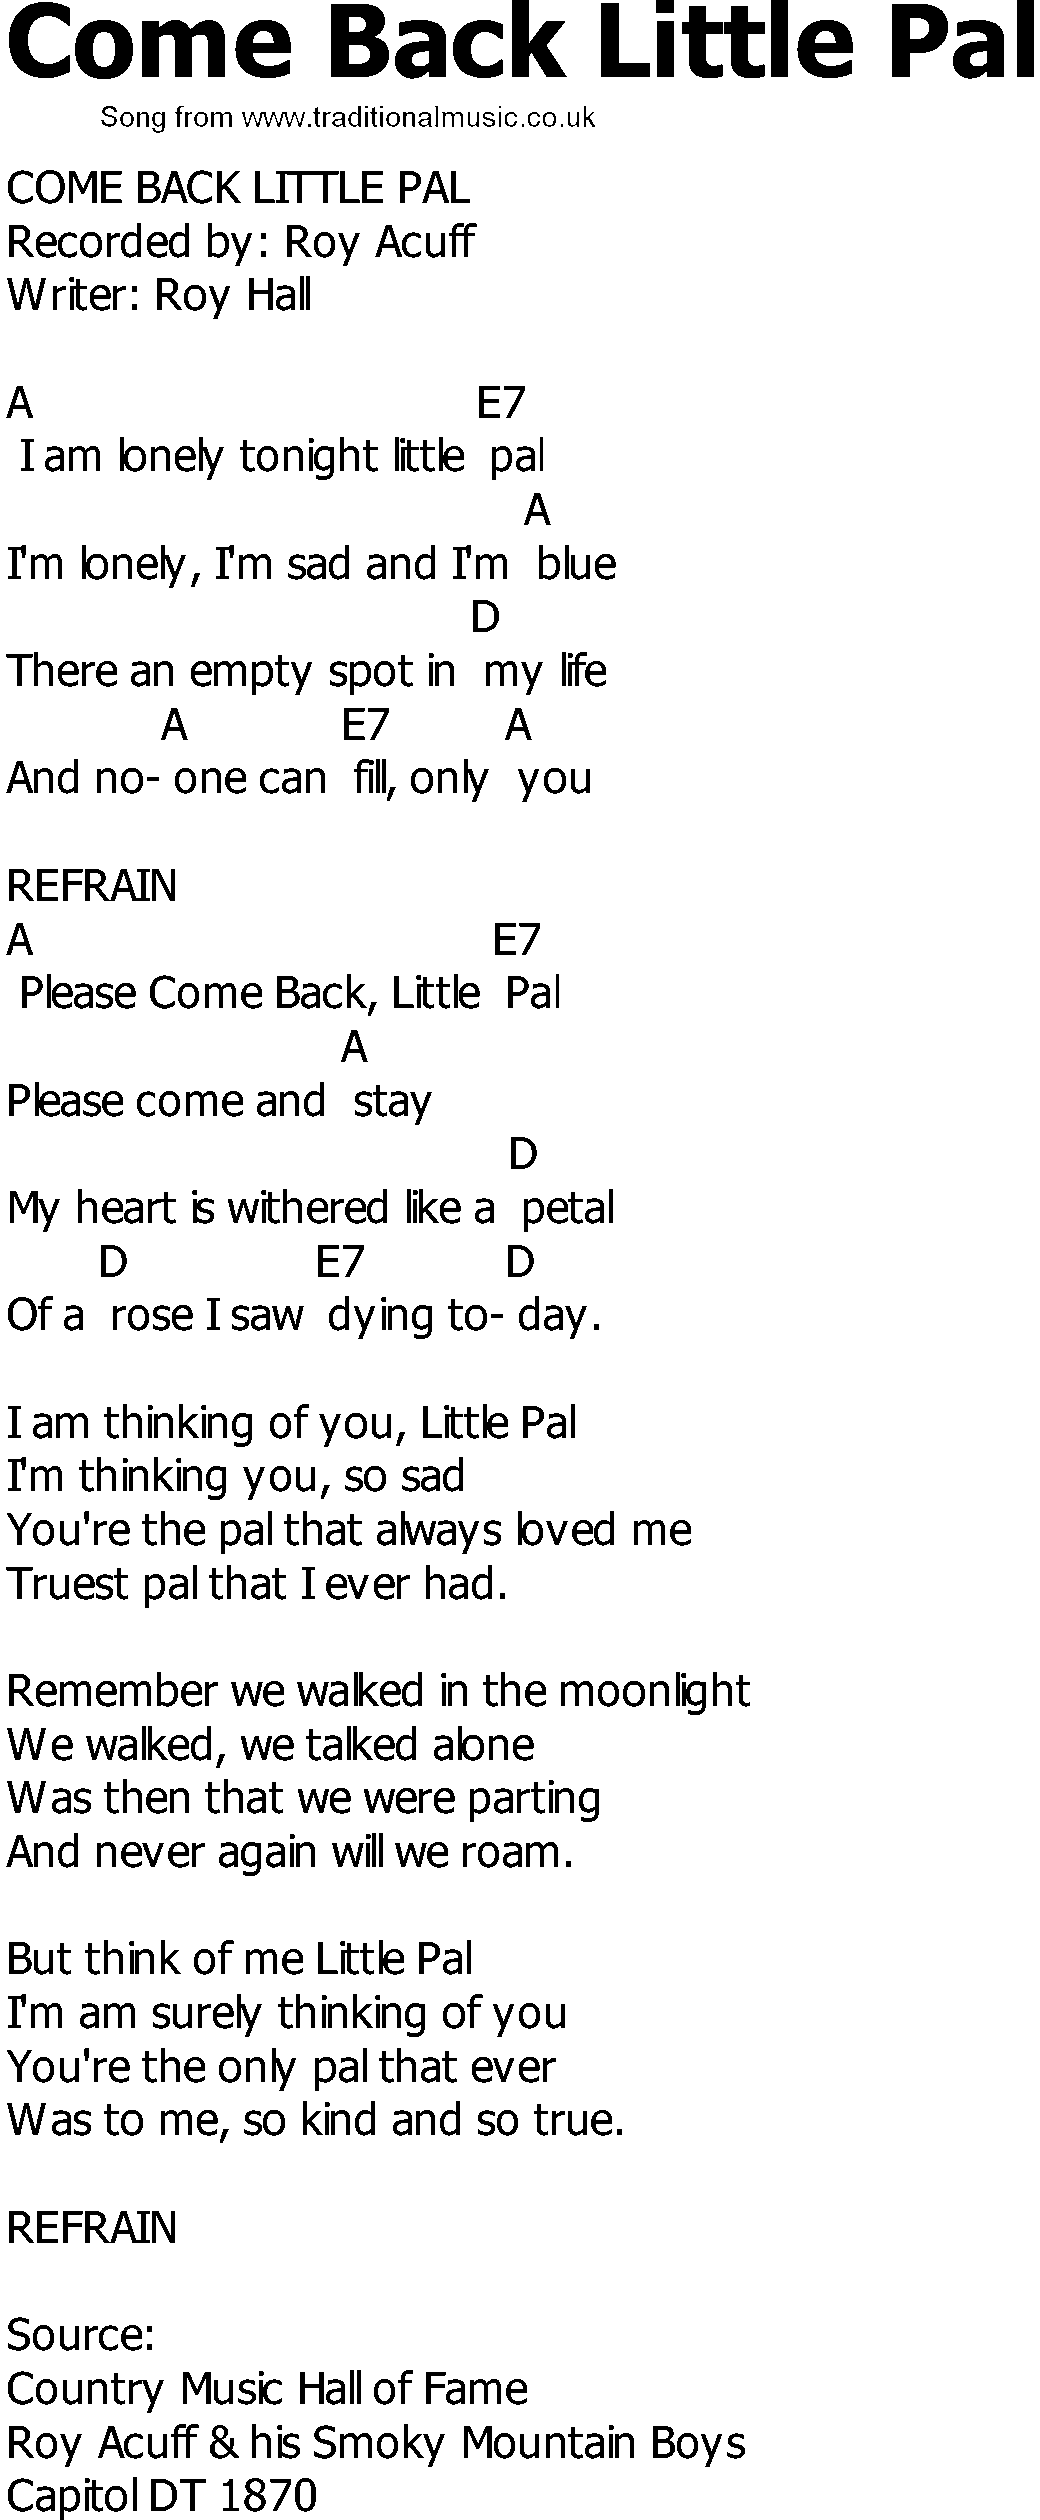 Old Country song lyrics with chords - Come Back Little Pal